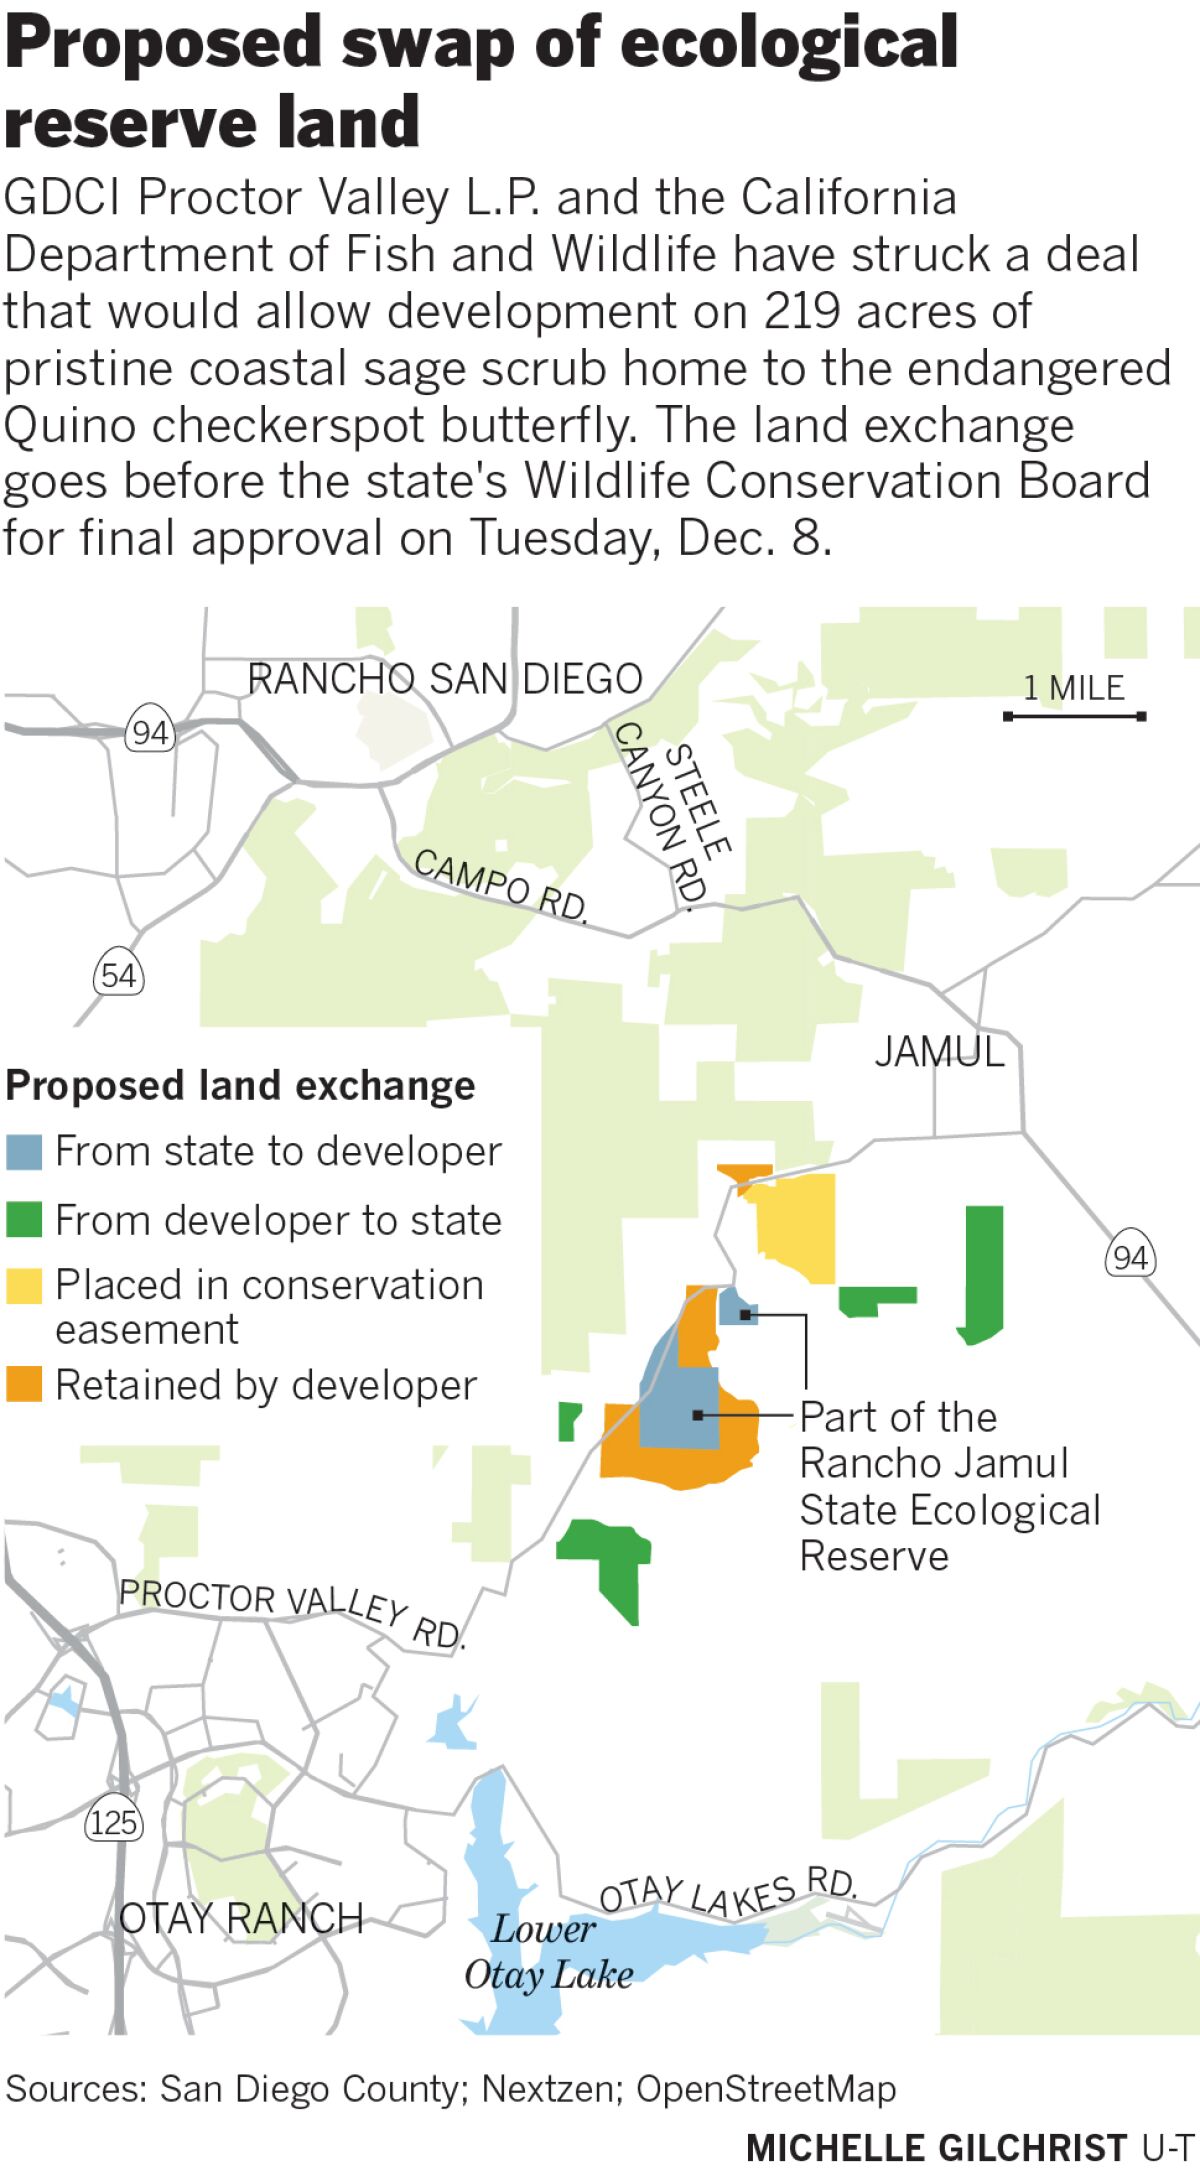 Proposed swap of ecological reserve land